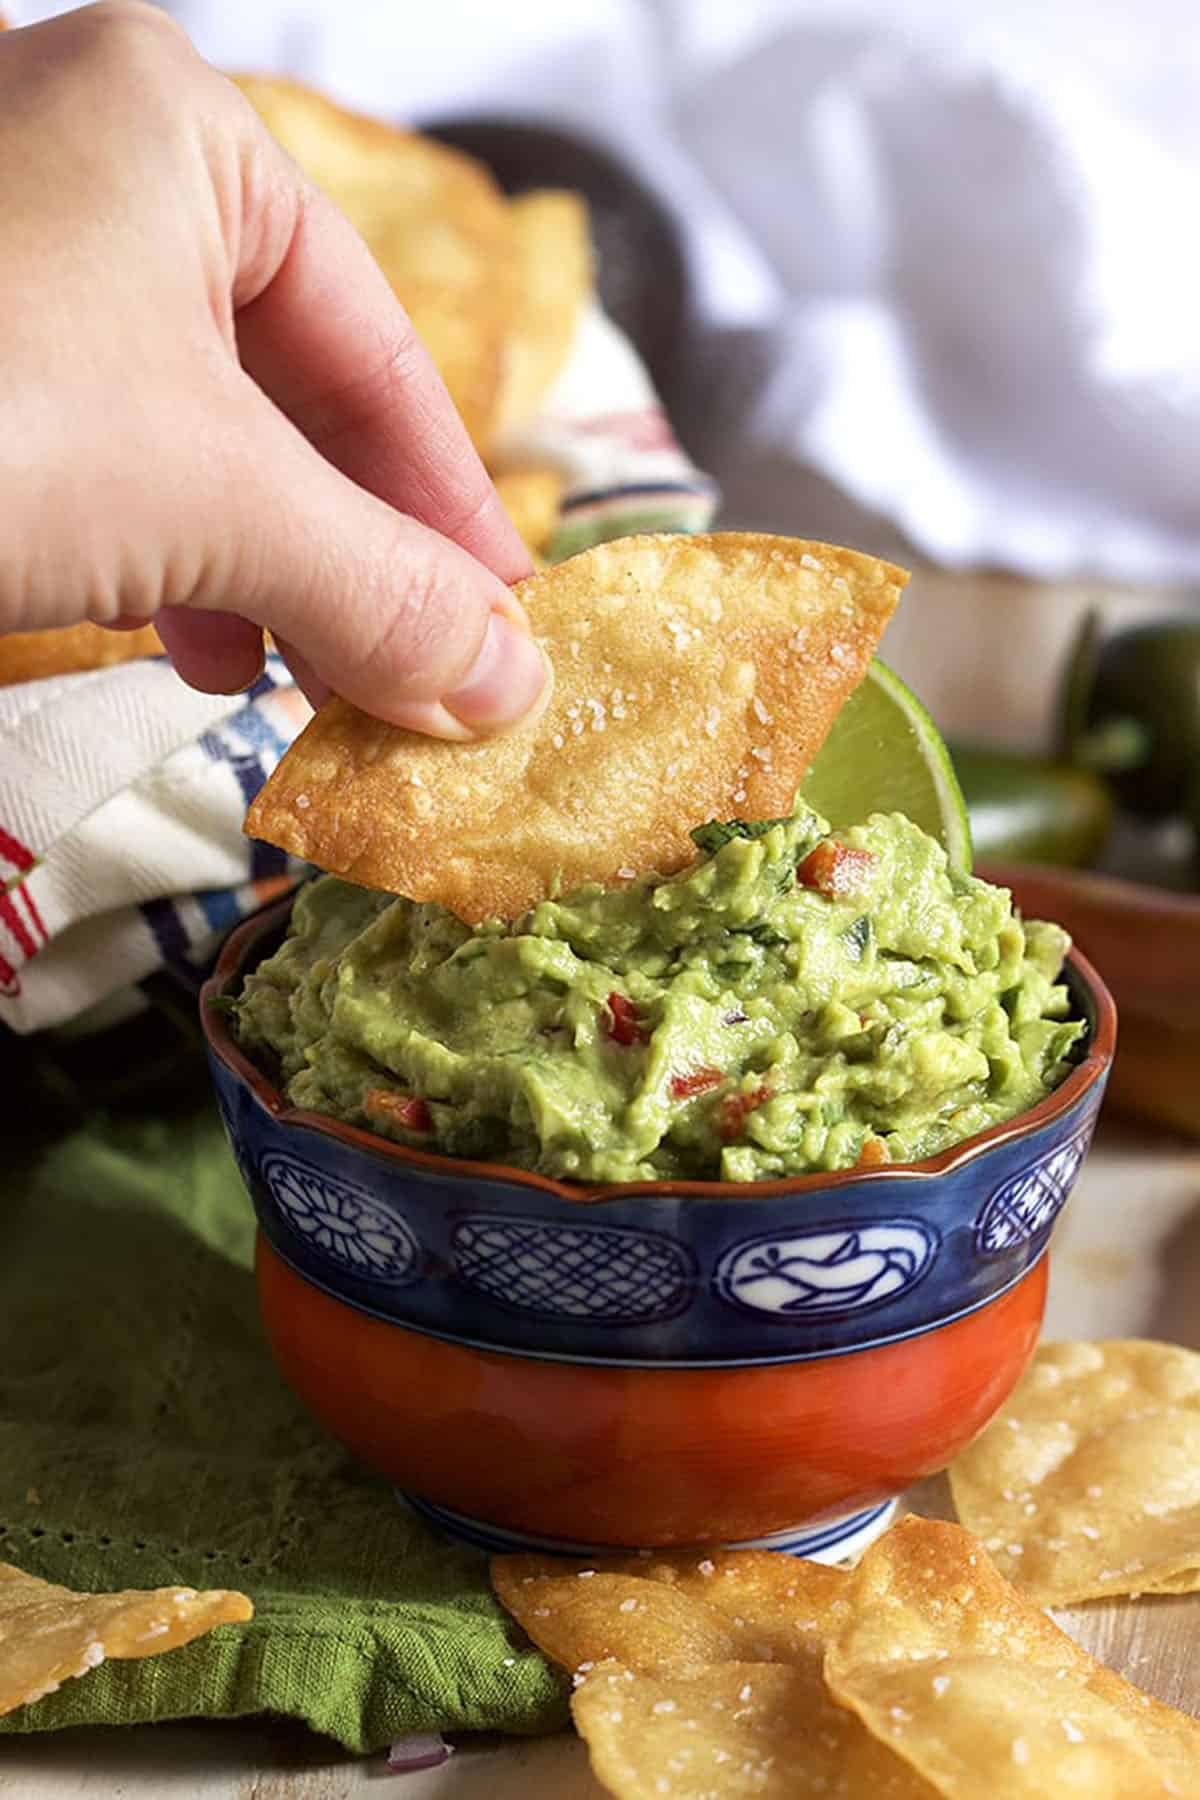 A hand holding a tortilla chip dipping into a bowl of guacamole.